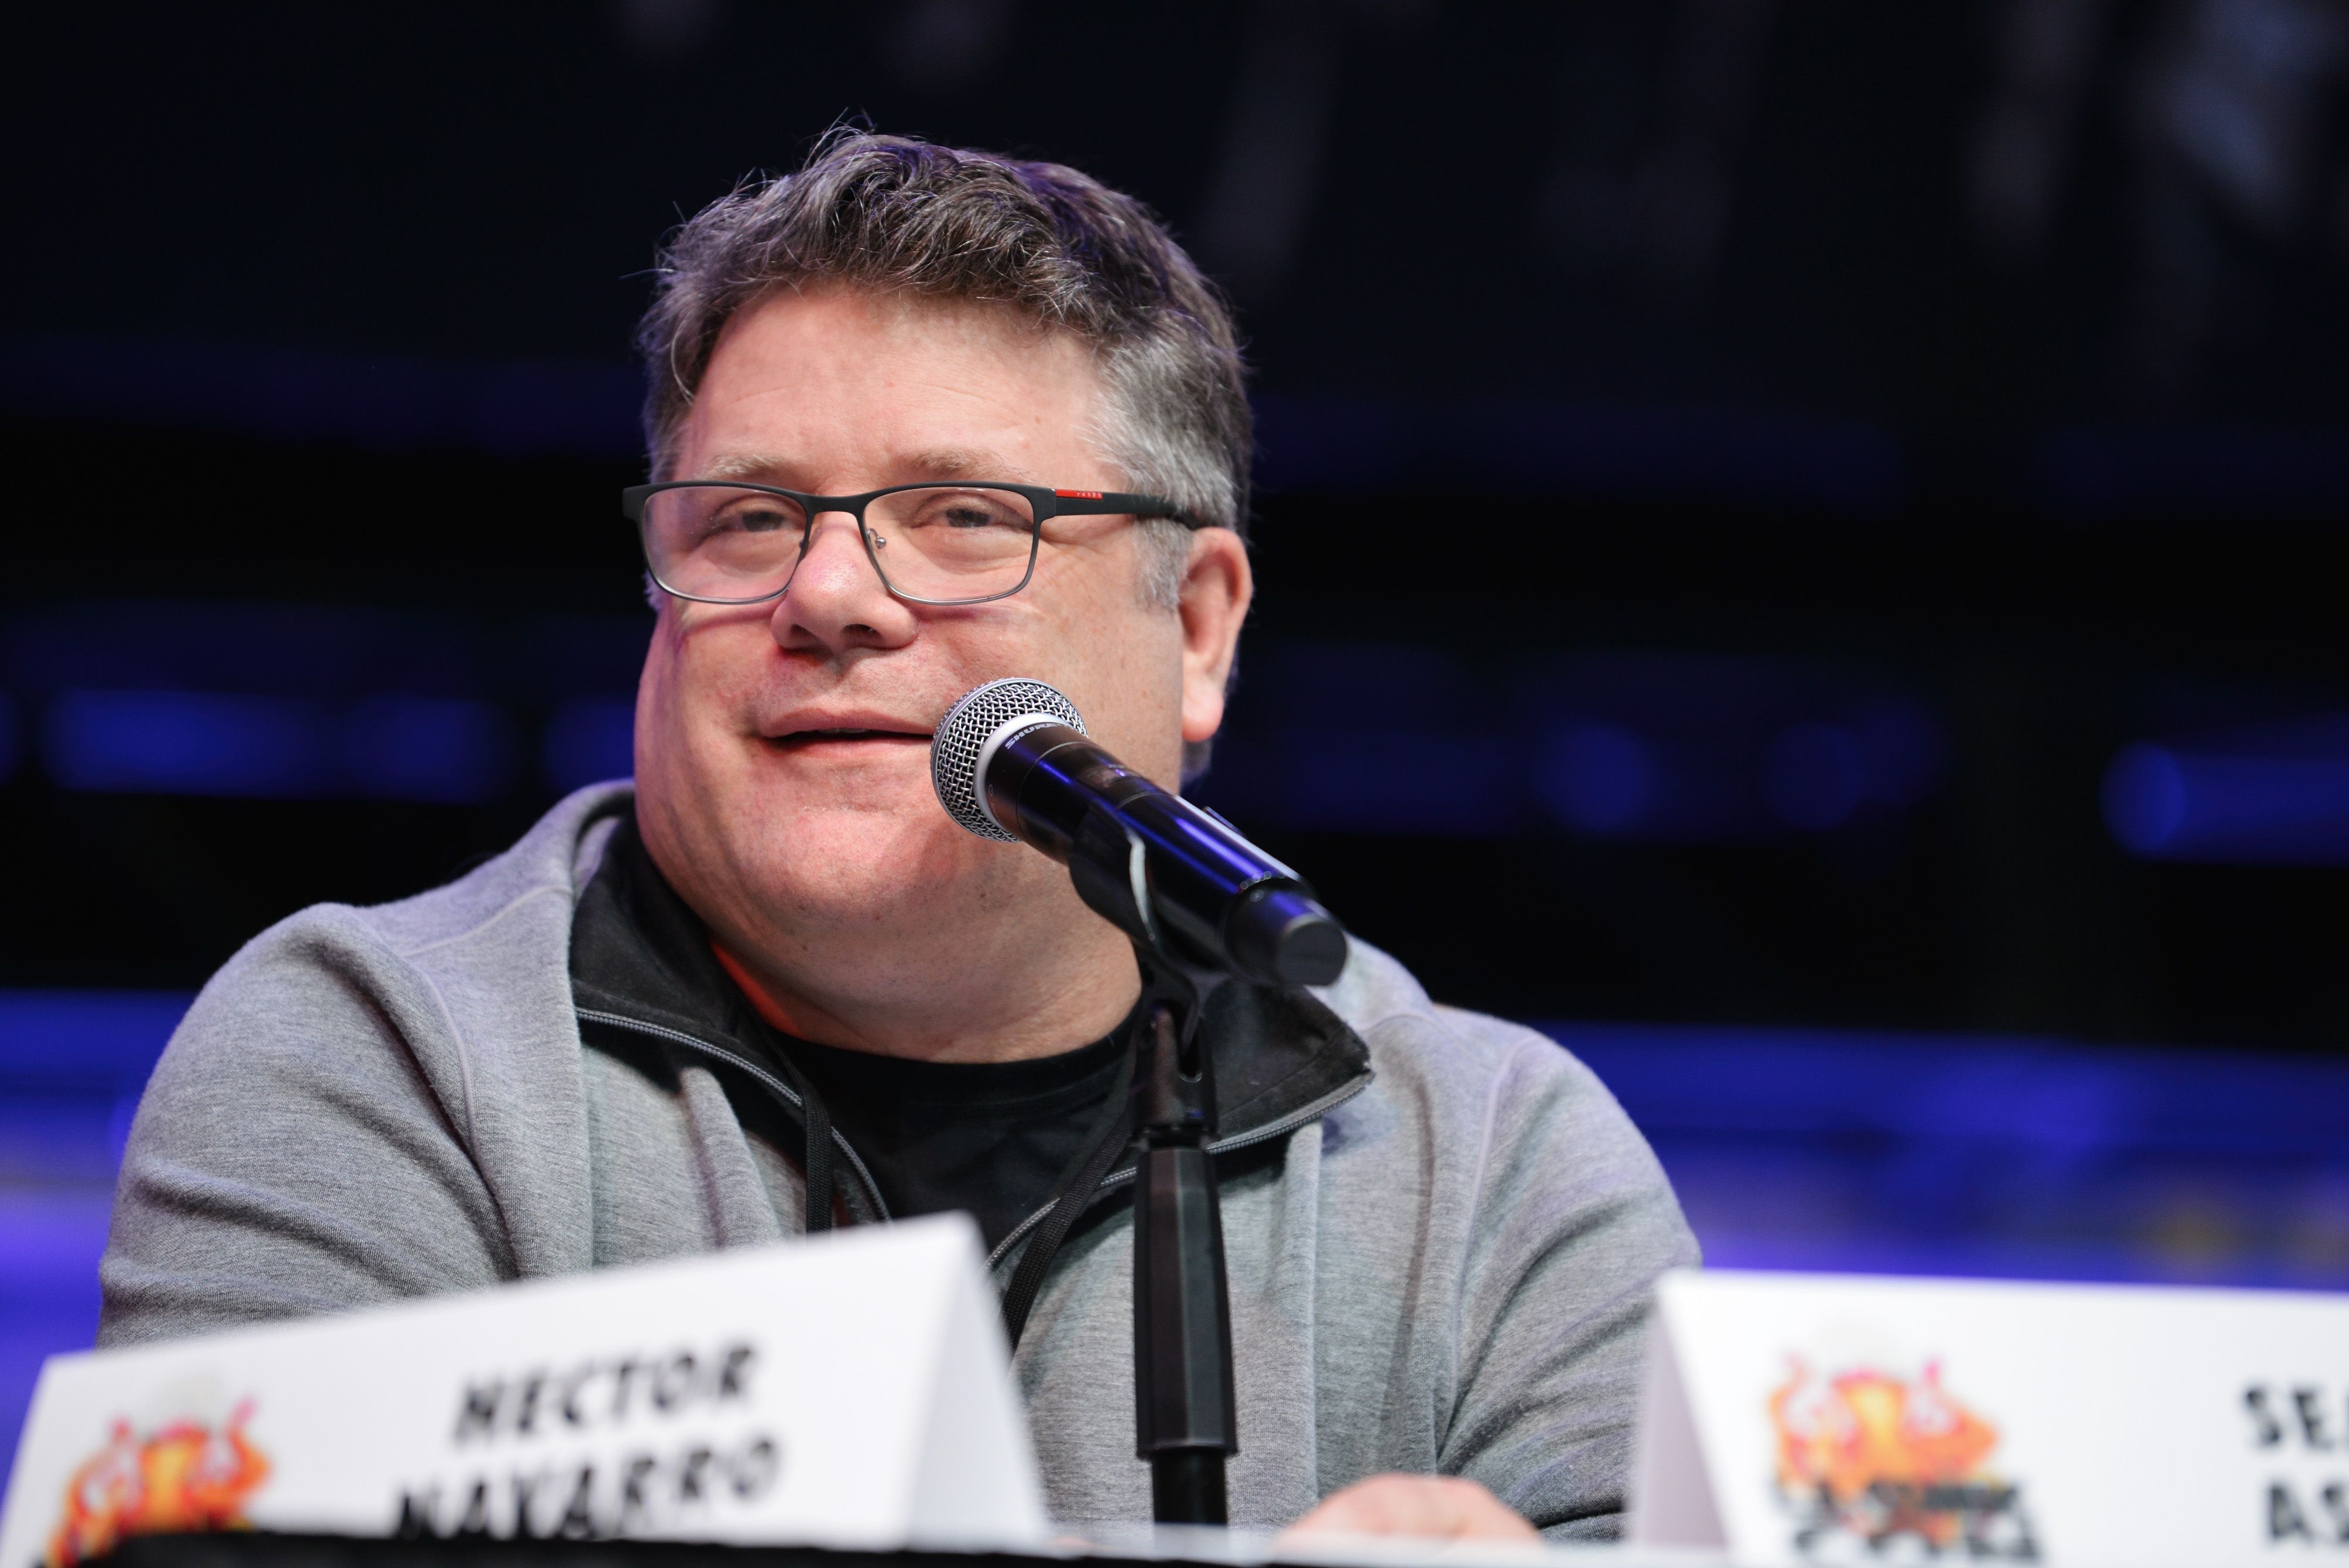 A shot of Sean Astin on a panel speaking into a microphone